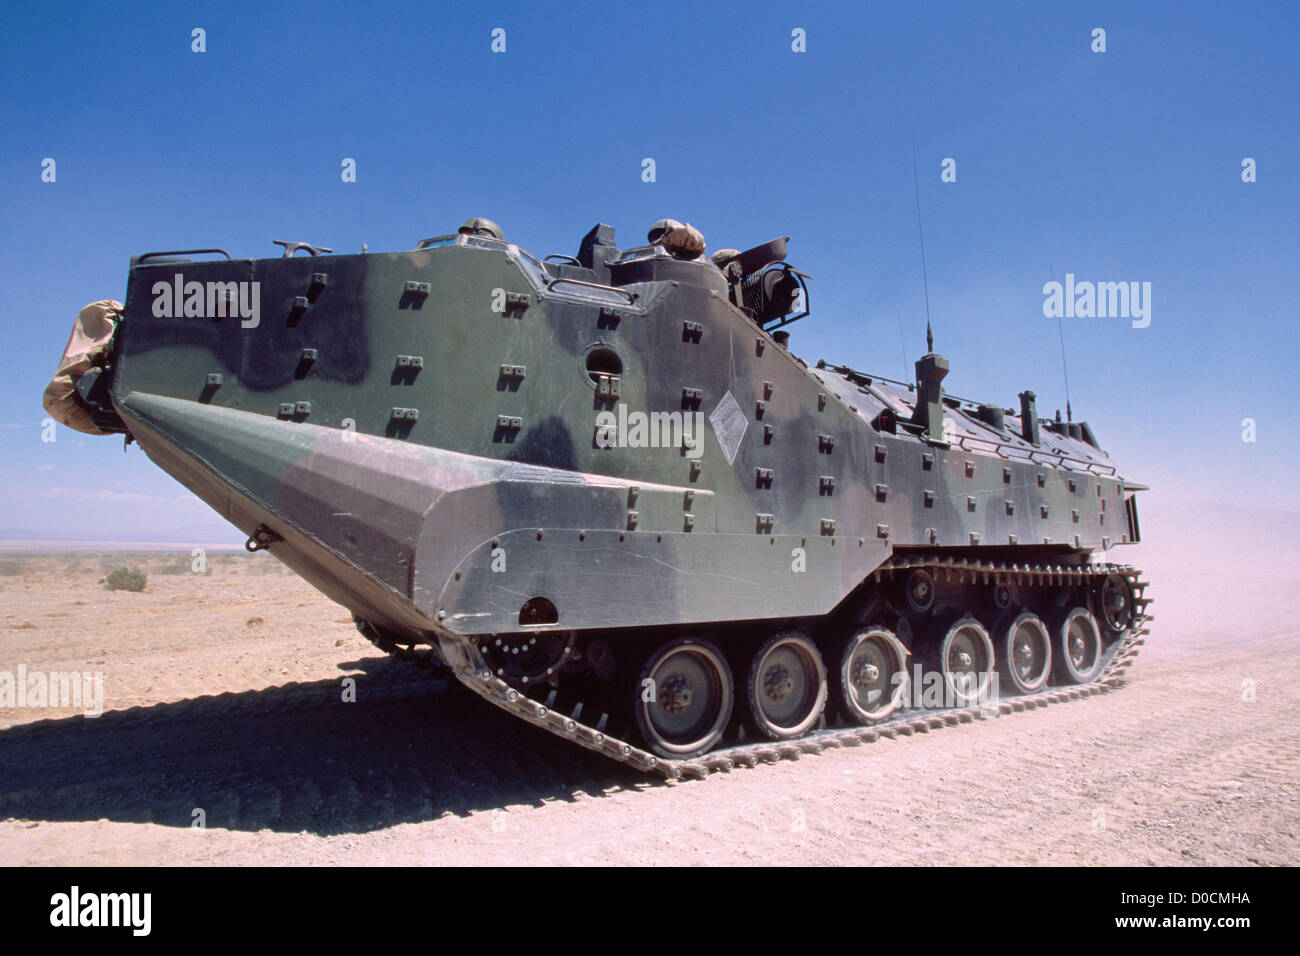 US Marine AAV-7 Armored Personnel Carrier Maneuvers Down a Dirt Road Stock Photo